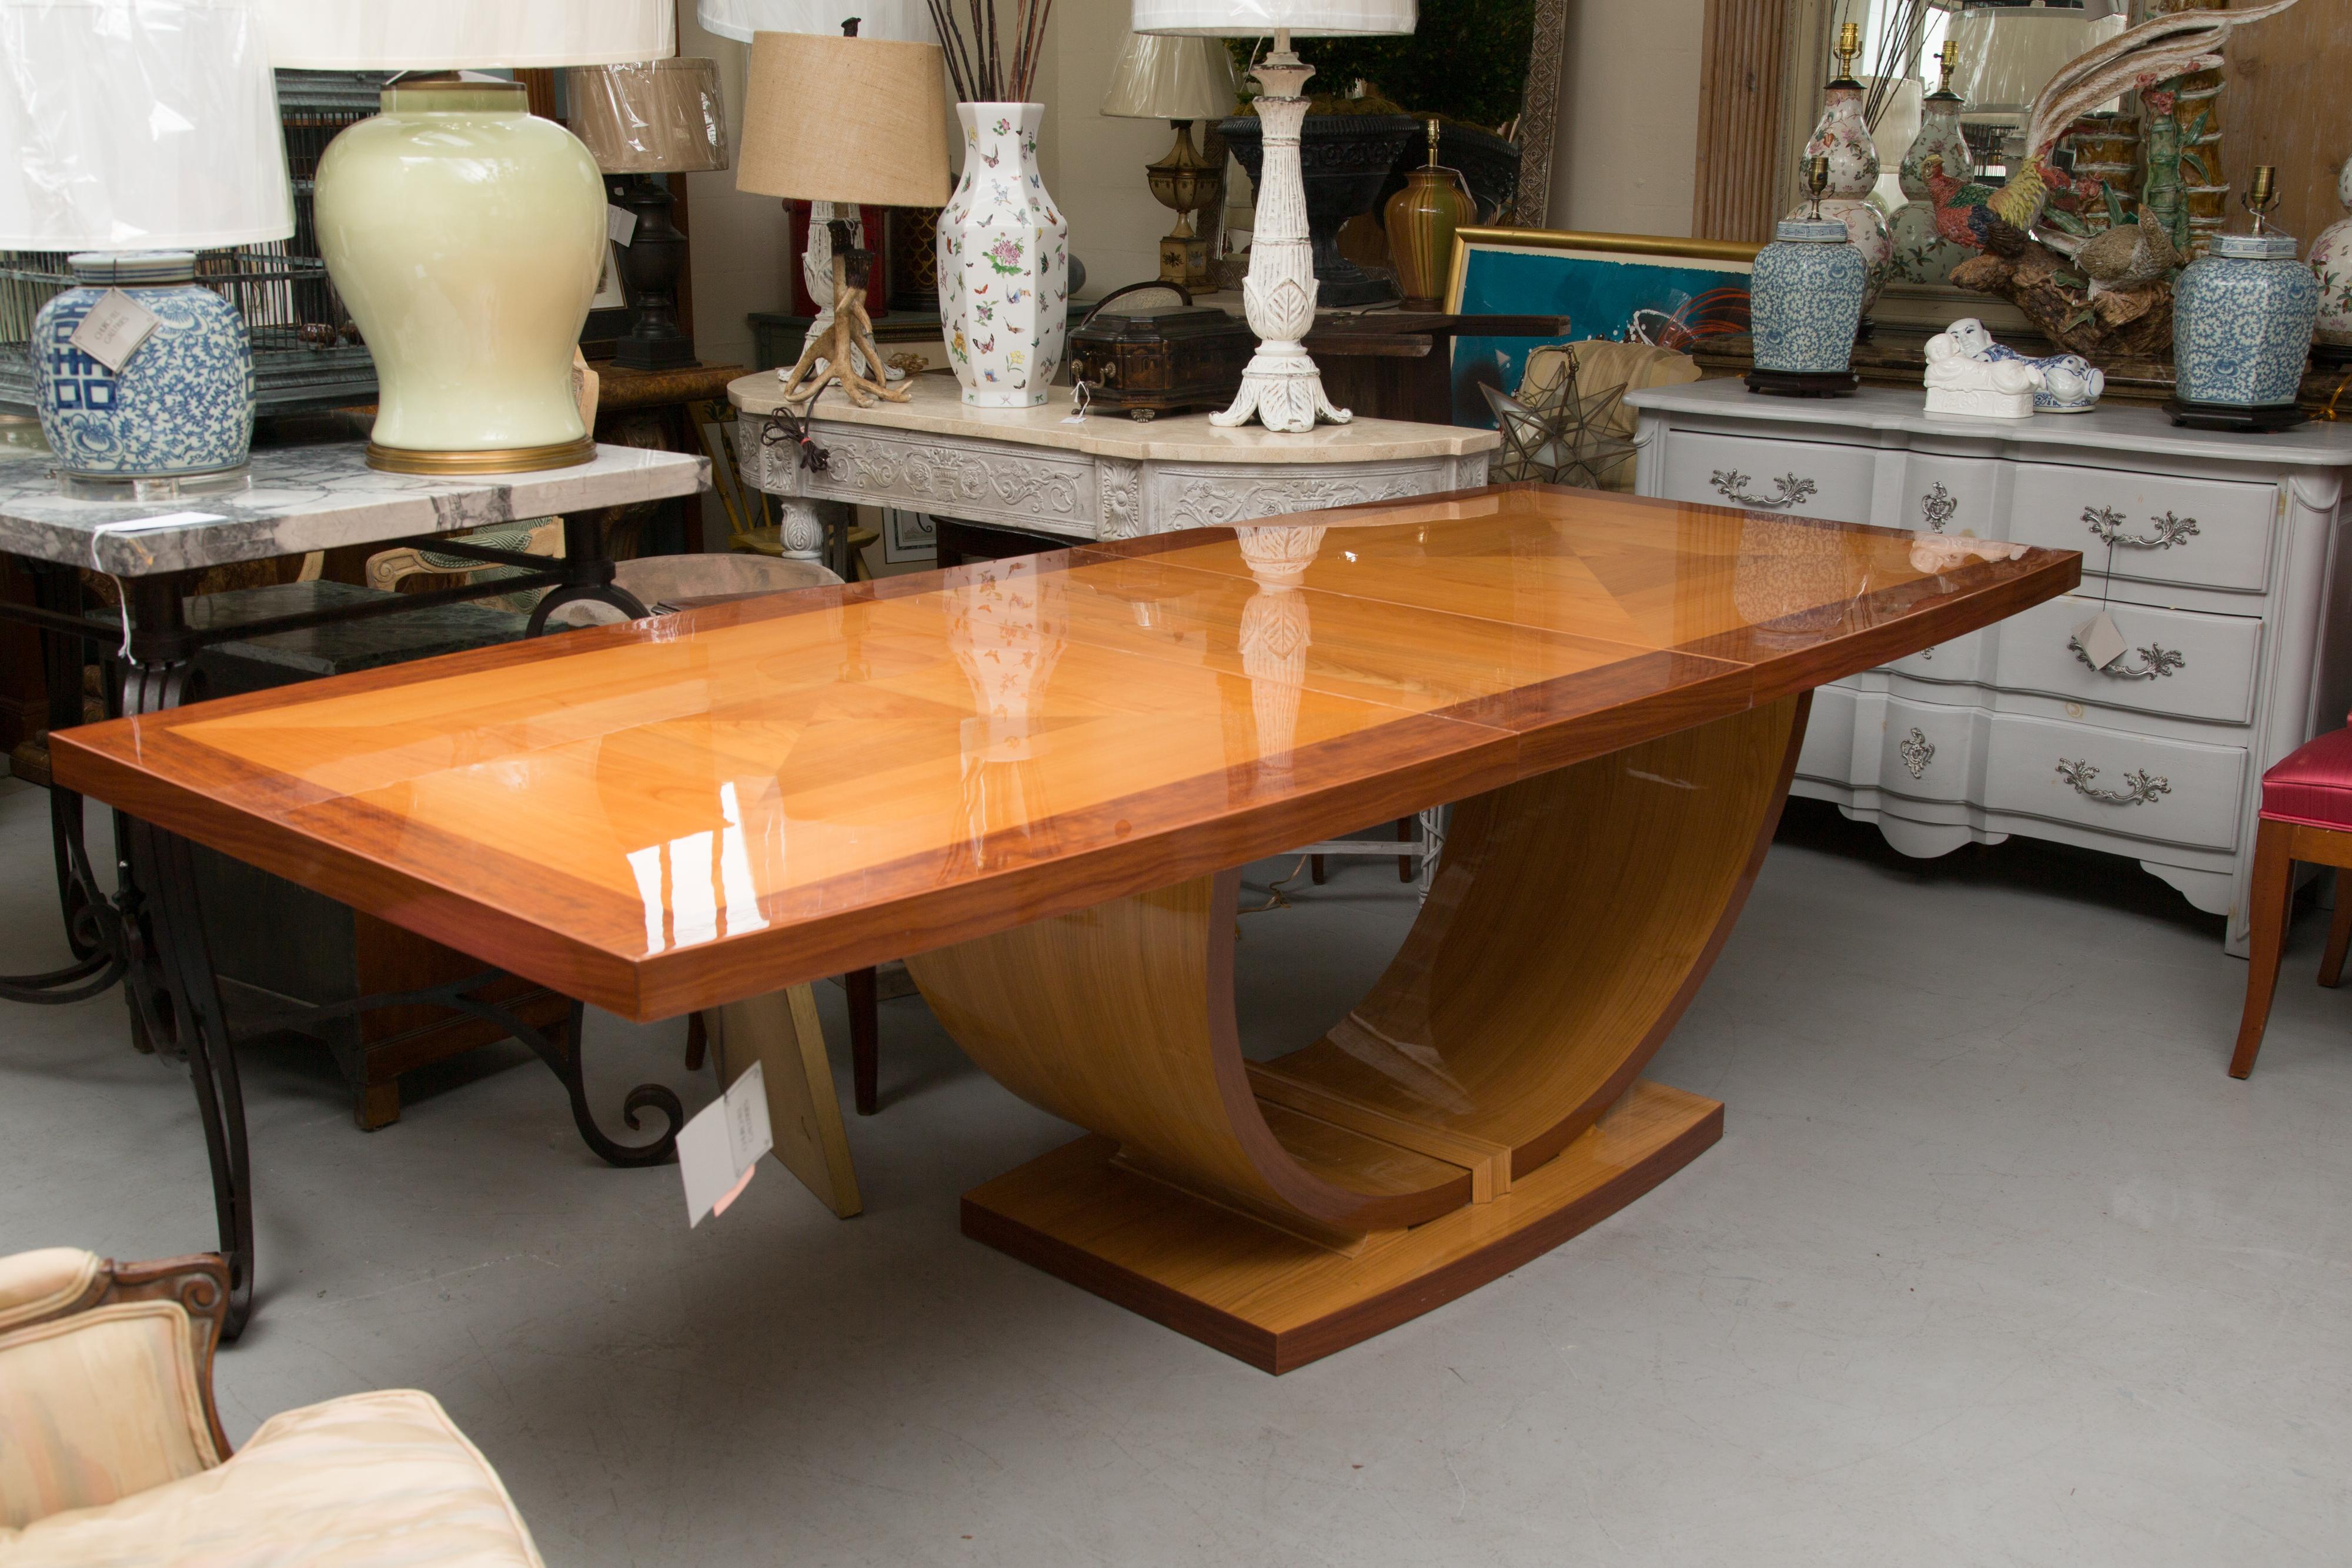 This highly polished Italian handmade table is in rectangular form. The top is supported by a base with arches and is joined by a conforming rectangular base. The top is banded and has a geometric diamond inlaid form flanked by triangles. The table